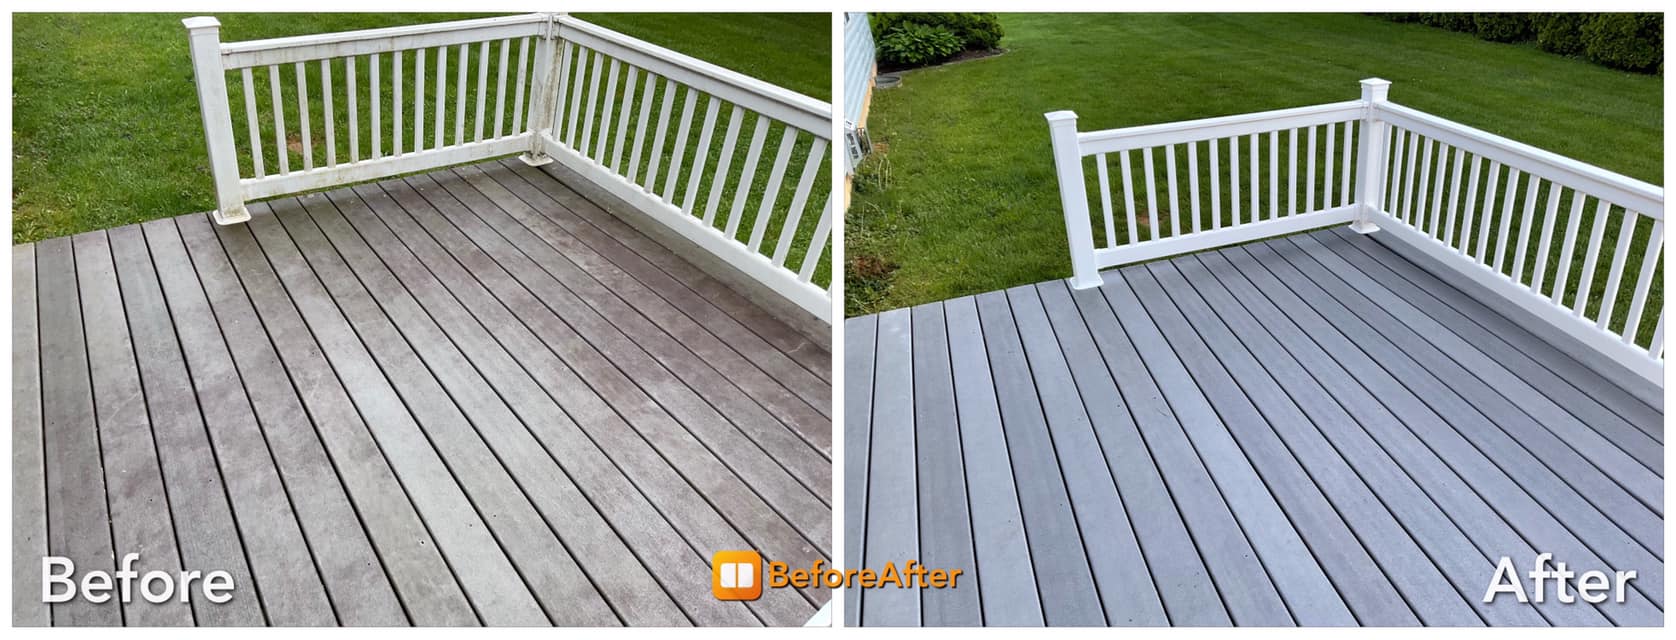 Trex Deck Cleaning in Bethlehem Township, PA